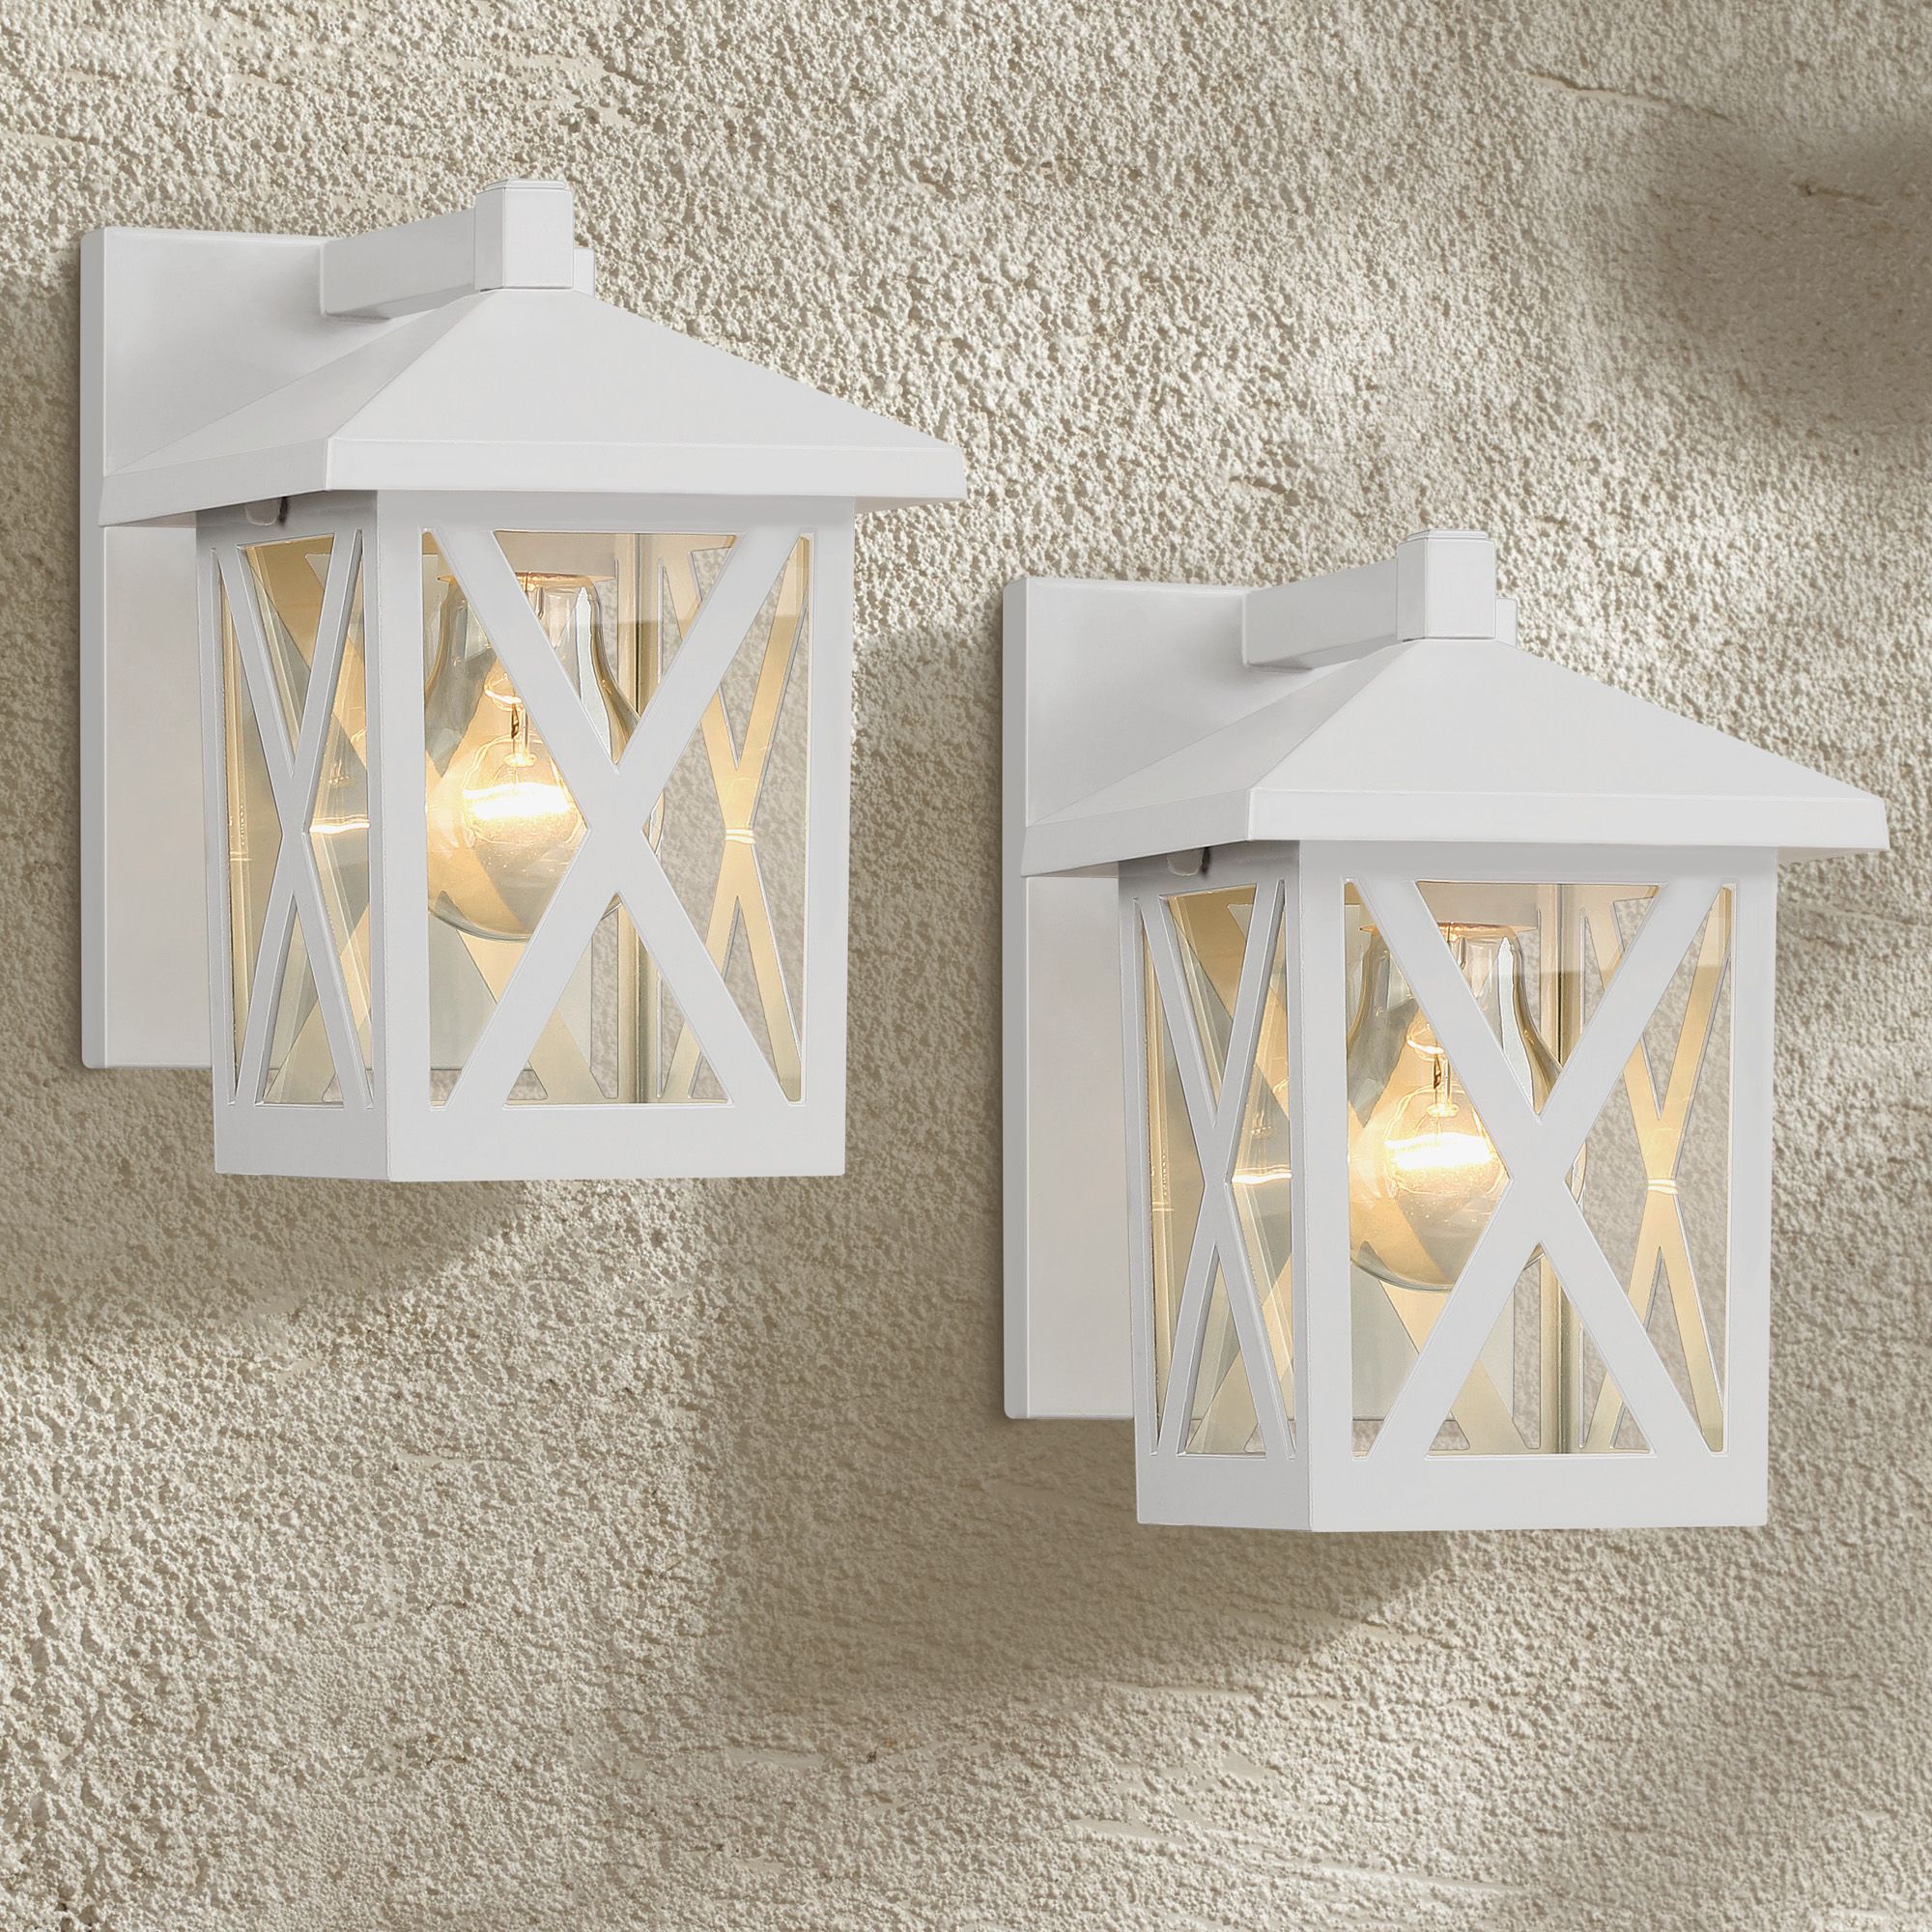 John Timberland Country Cottage Outdoor Wall Light Fixtures Set Of 2 White  7 1/2" Lantern Clear Glass Exterior House Porch Patio – Walmart Intended For Cottage White Lantern Chandeliers (View 11 of 15)